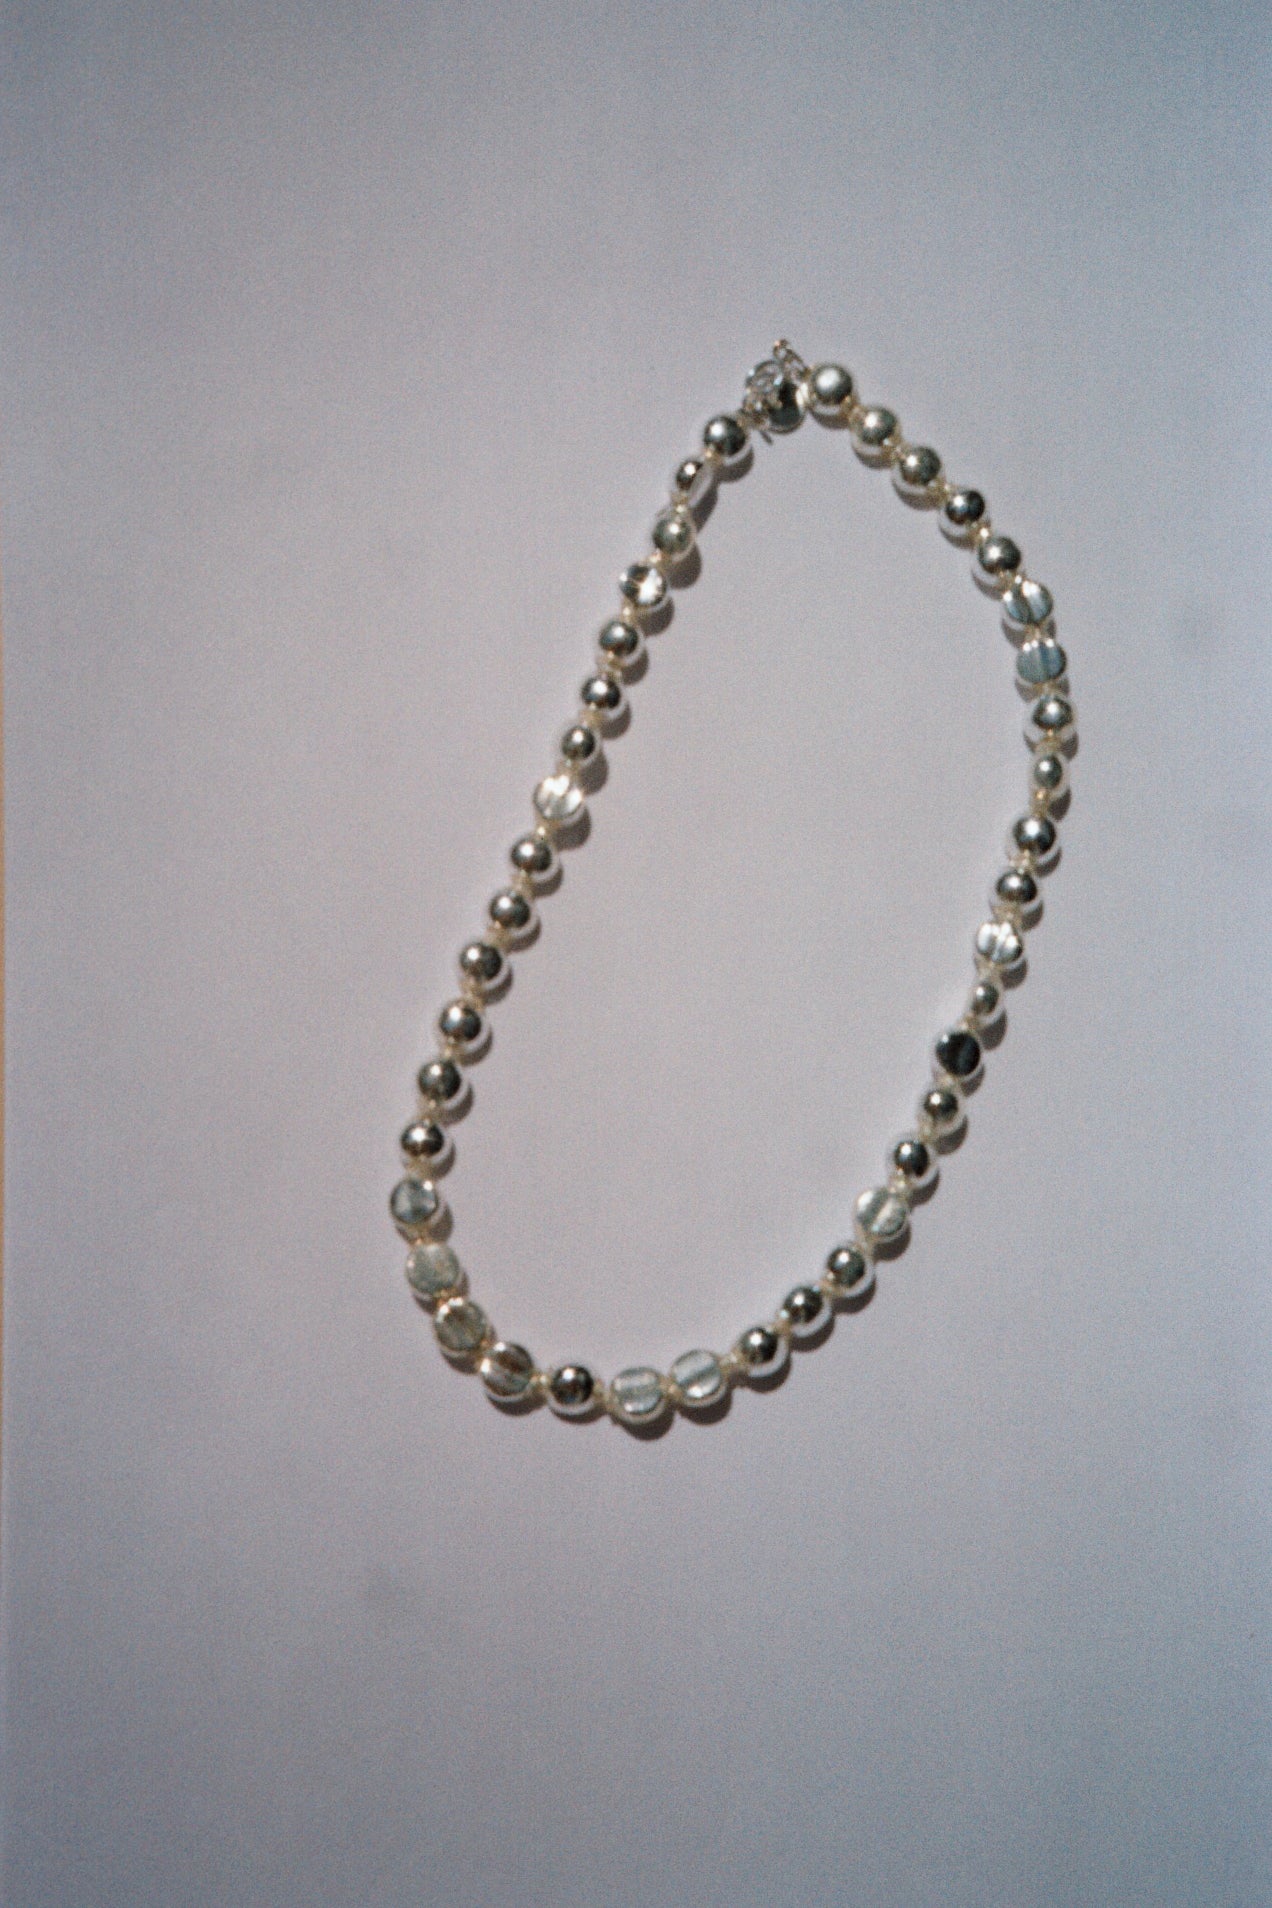 Fiole necklace - Round